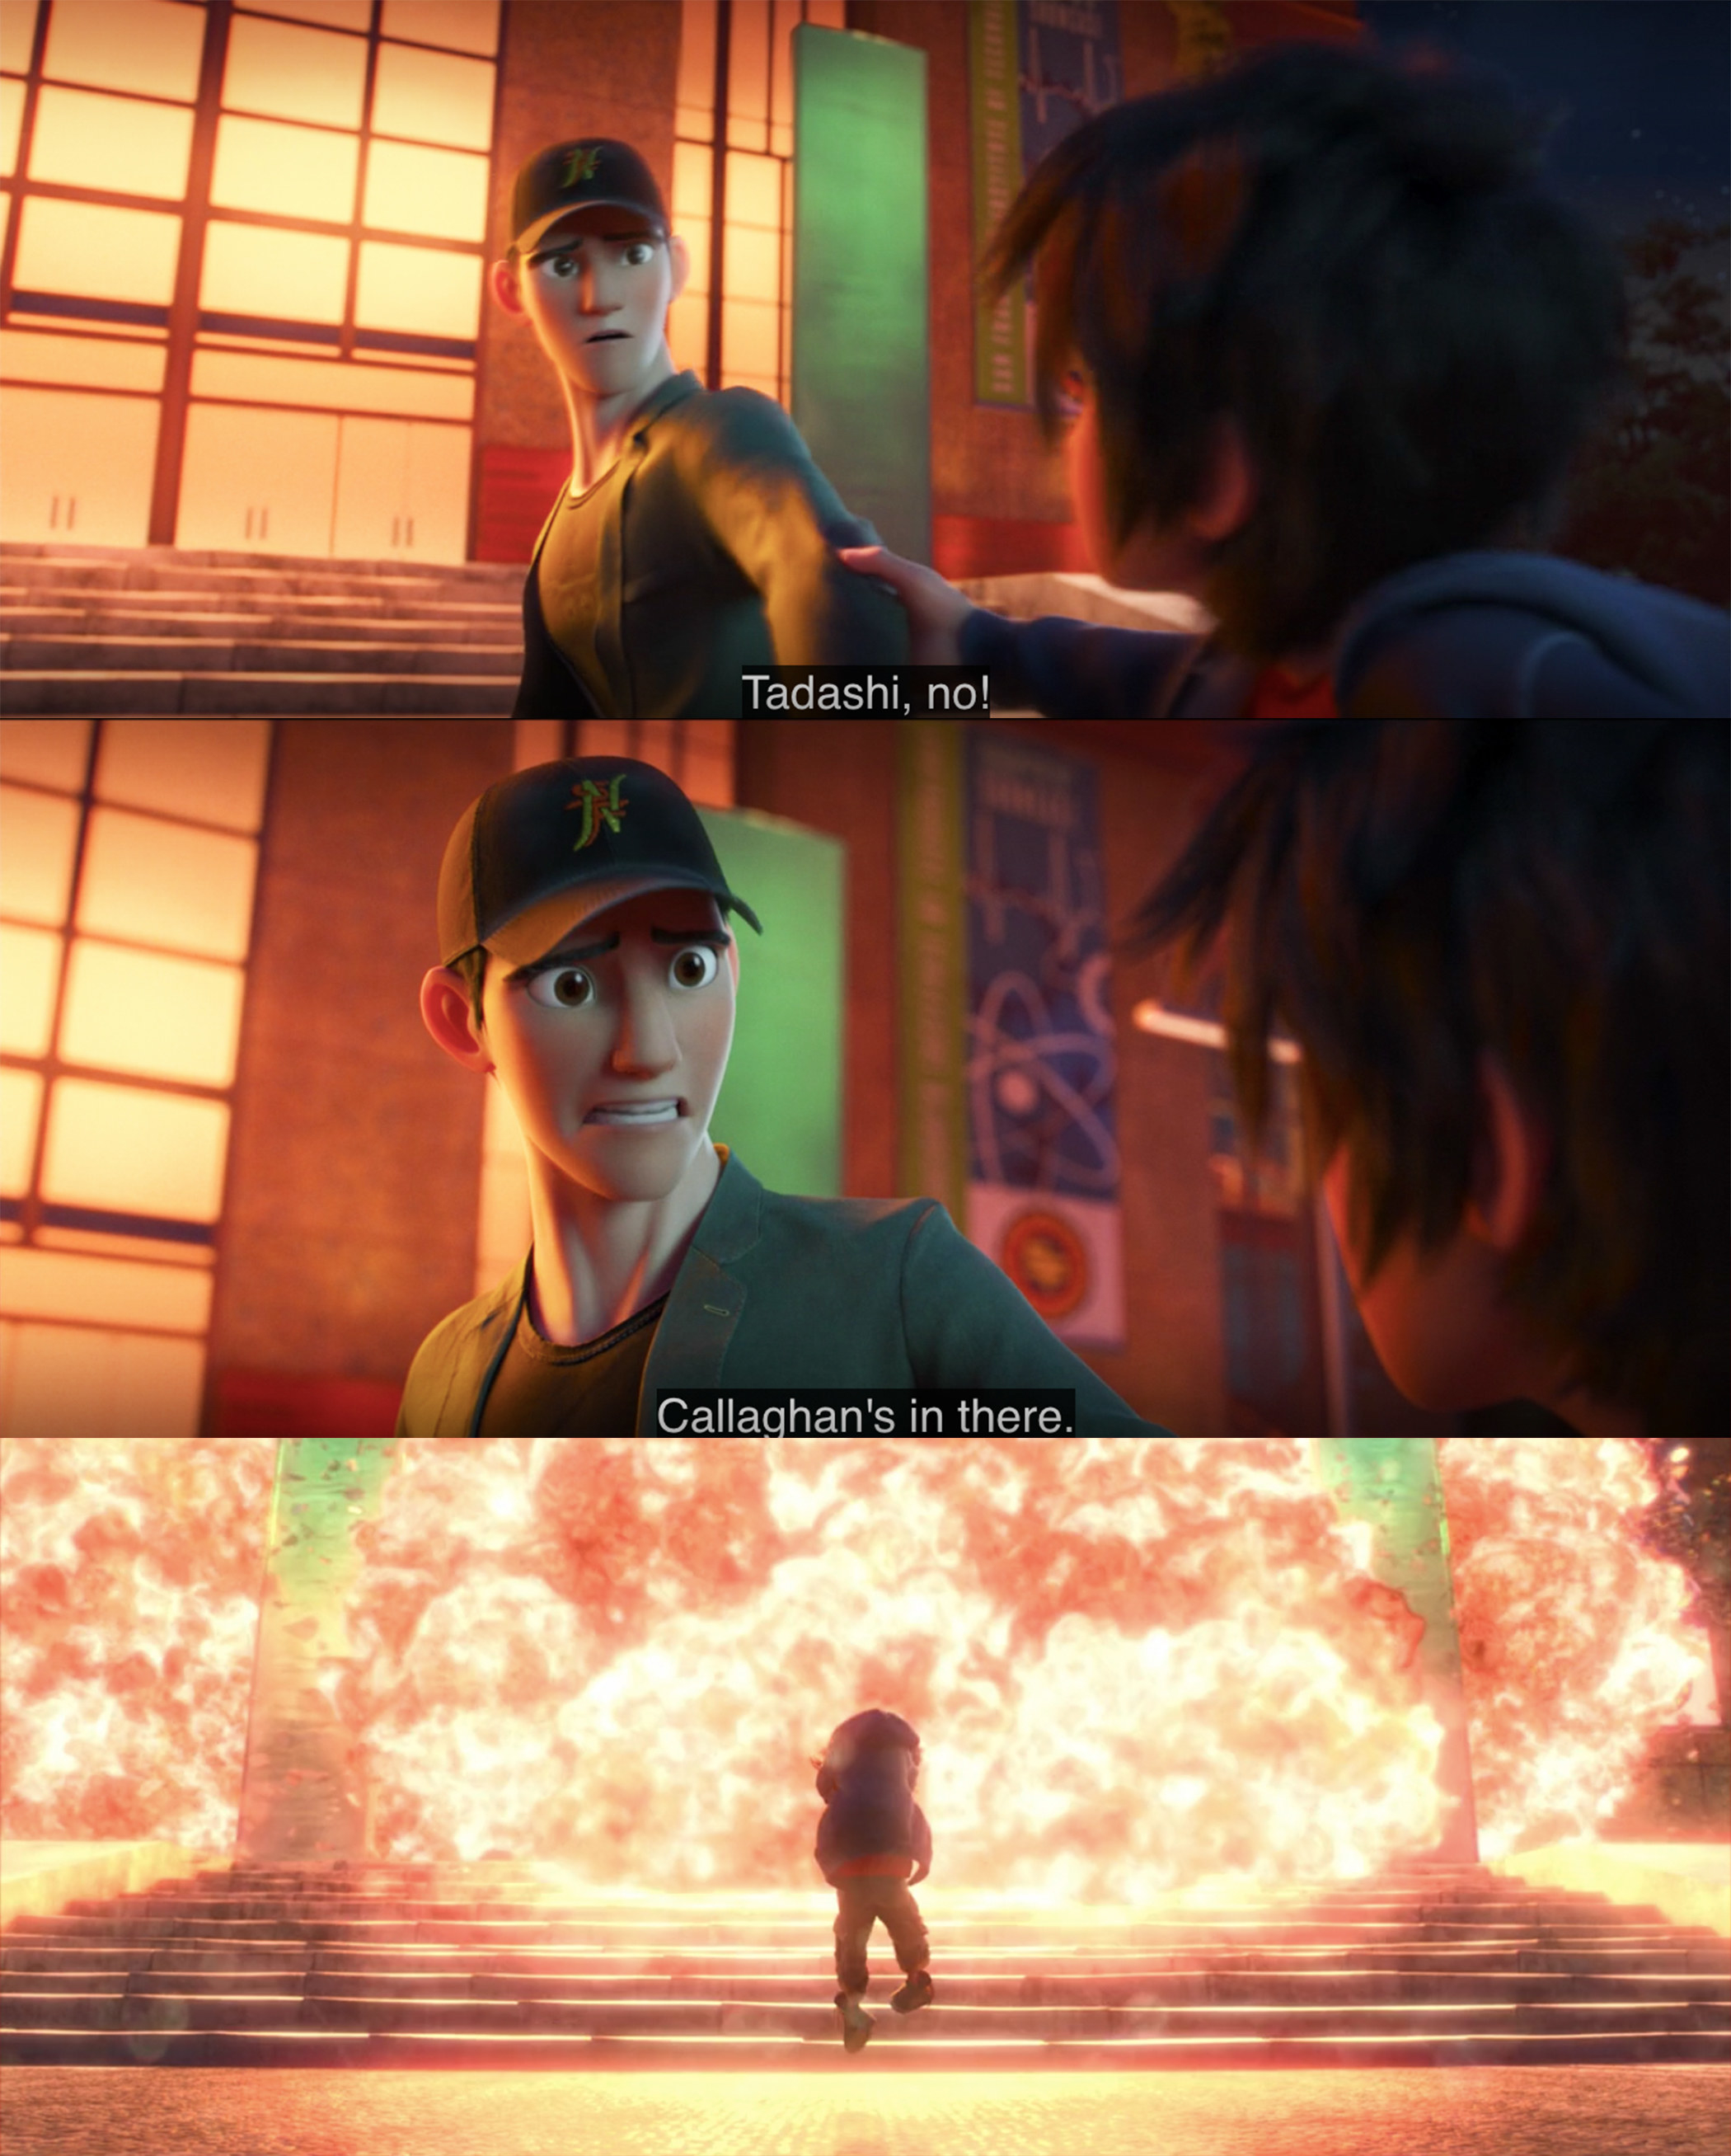 Tadashi runs into the burning building to save people right before it explodes